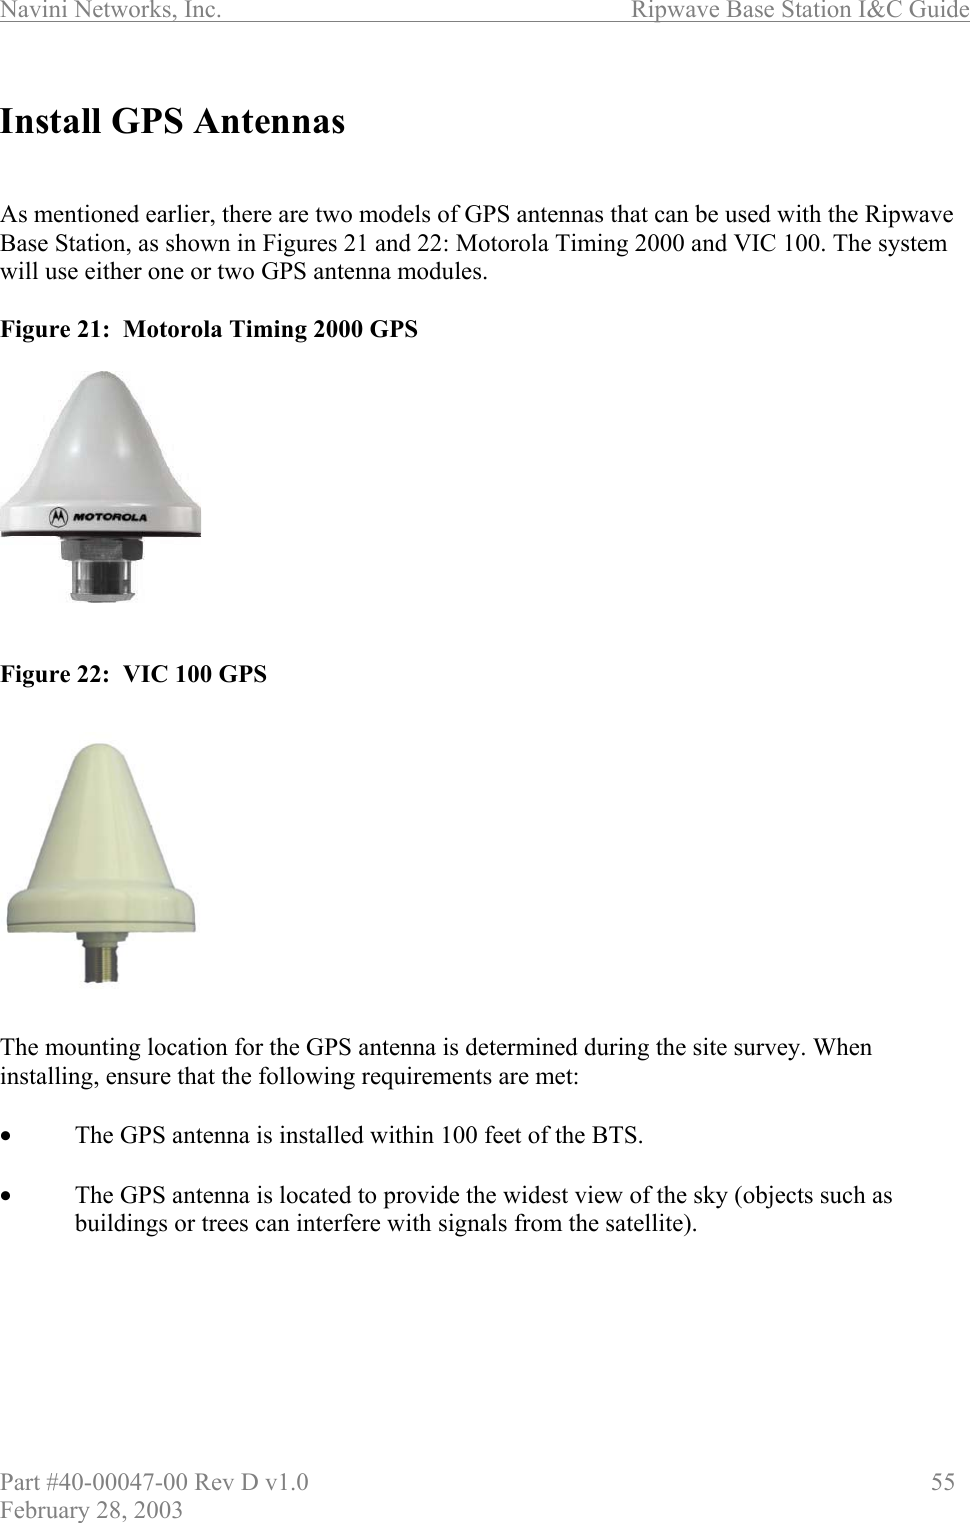 Navini Networks, Inc.                          Ripwave Base Station I&amp;C Guide Part #40-00047-00 Rev D v1.0                     55 February 28, 2003  Install GPS Antennas   As mentioned earlier, there are two models of GPS antennas that can be used with the Ripwave  Base Station, as shown in Figures 21 and 22: Motorola Timing 2000 and VIC 100. The system will use either one or two GPS antenna modules.   Figure 21:  Motorola Timing 2000 GPS            Figure 22:  VIC 100 GPS             The mounting location for the GPS antenna is determined during the site survey. When installing, ensure that the following requirements are met:  •  The GPS antenna is installed within 100 feet of the BTS.  •  The GPS antenna is located to provide the widest view of the sky (objects such as buildings or trees can interfere with signals from the satellite).  